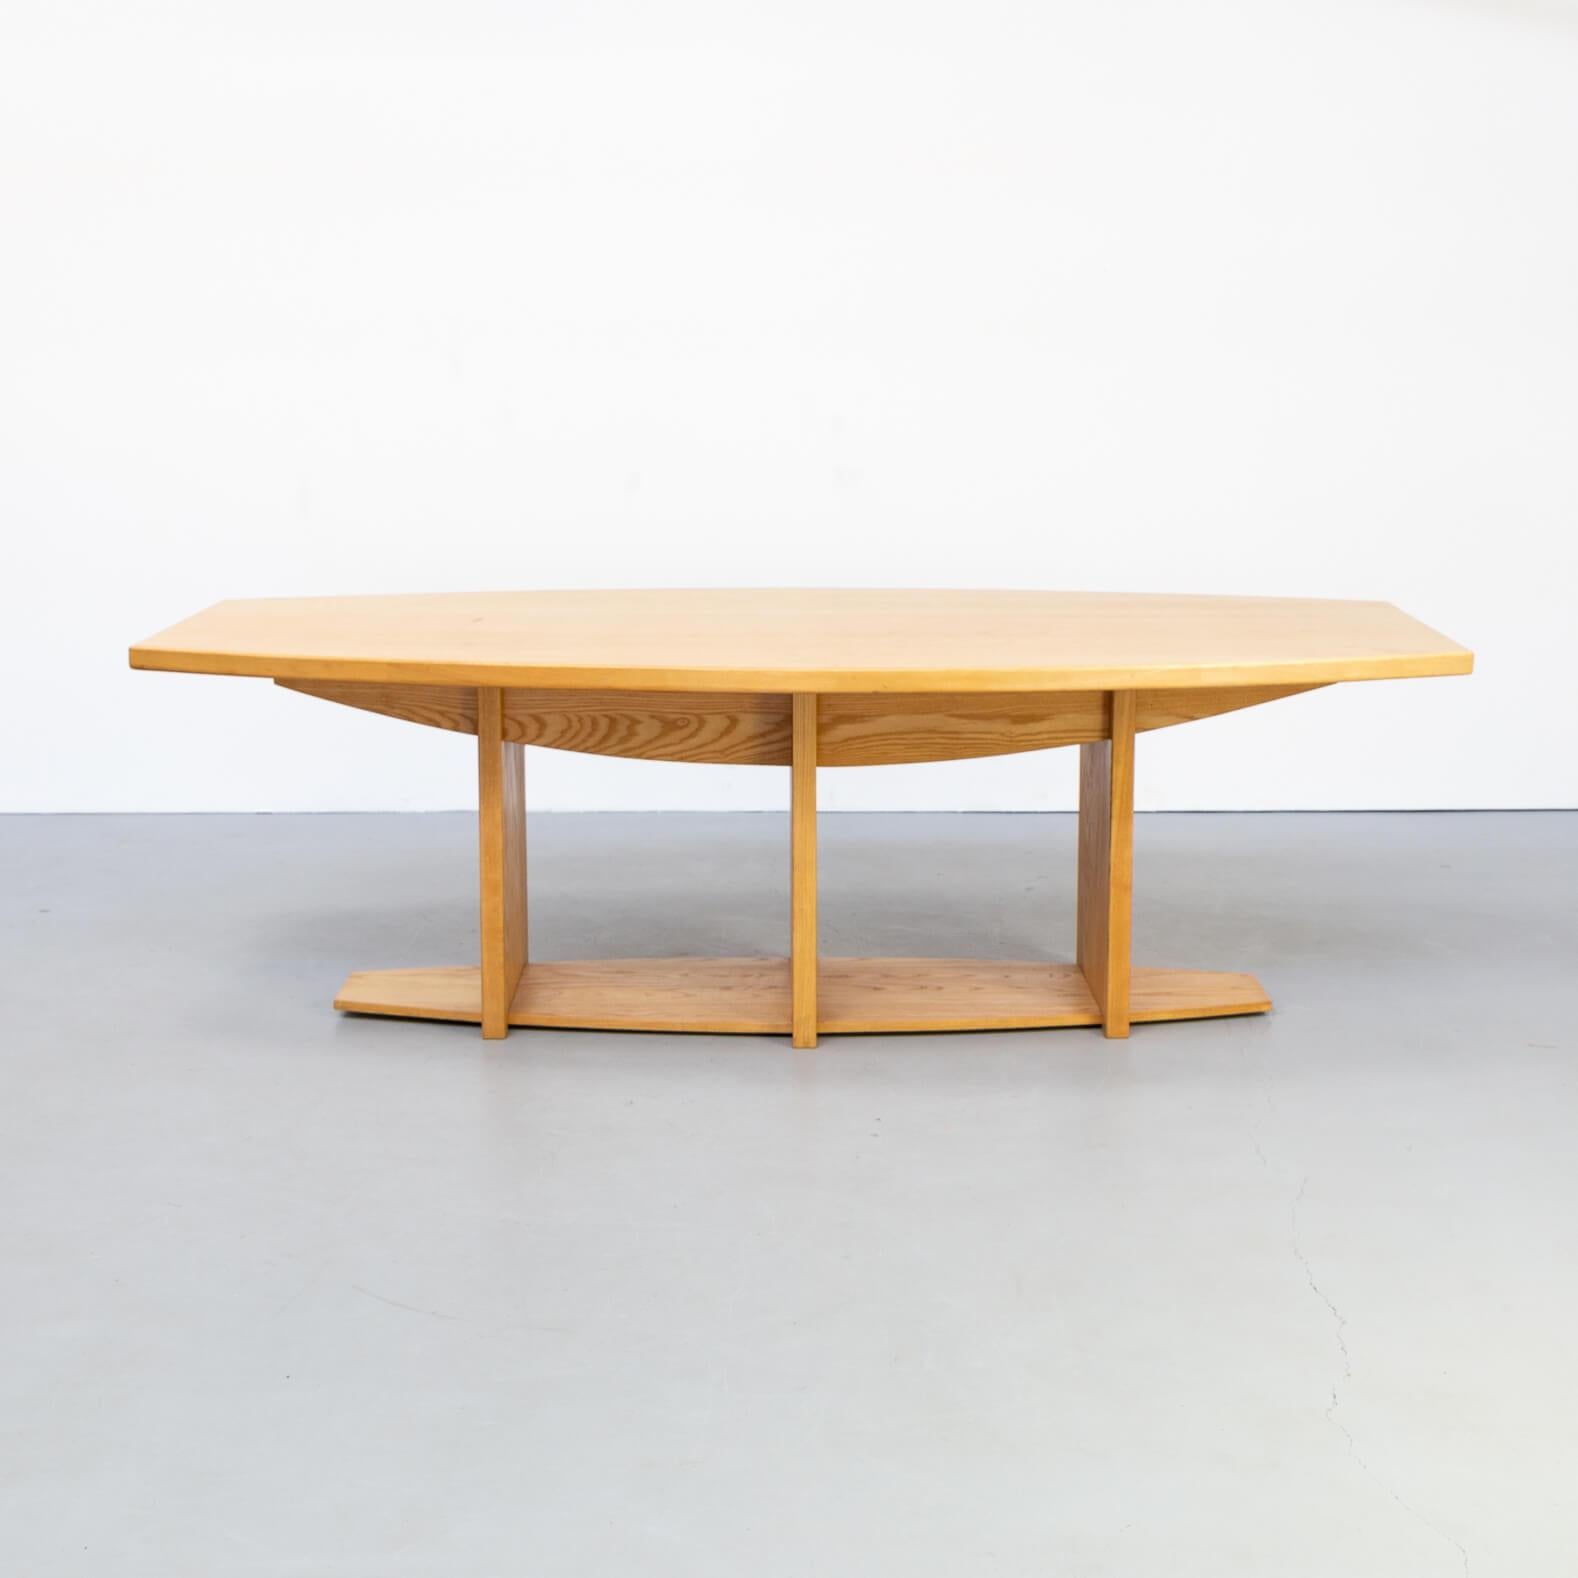 Modern 1980s Ashwood Architectural Taylor Made Oval Dining Table For Sale